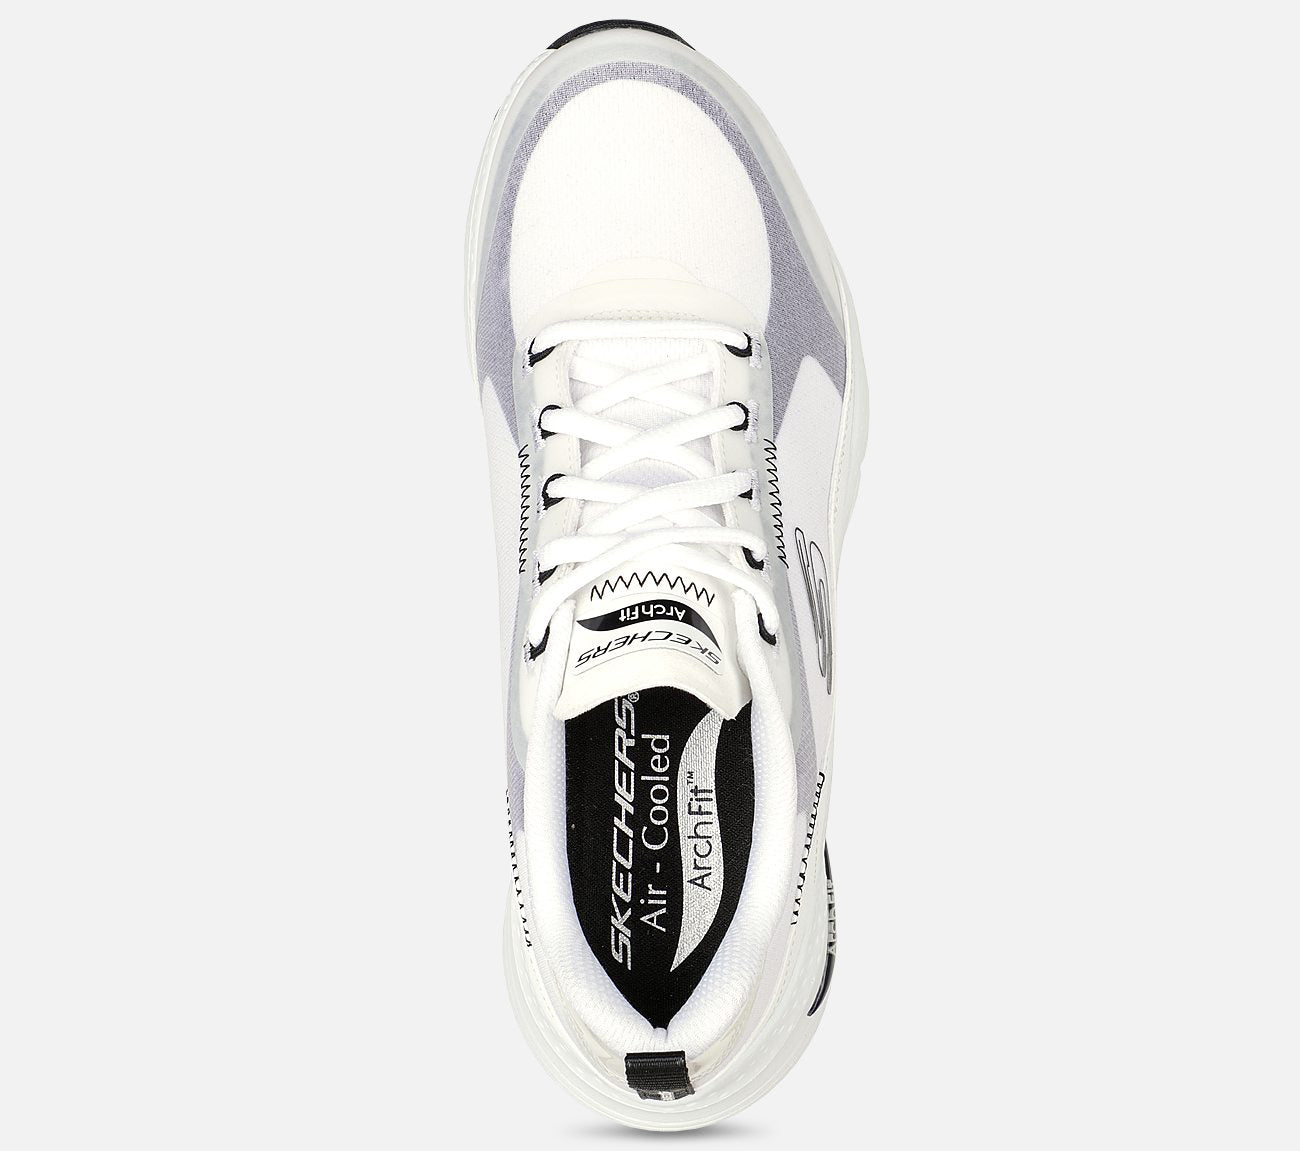 Arch Fit - Cool Oasis Shoe Skechers